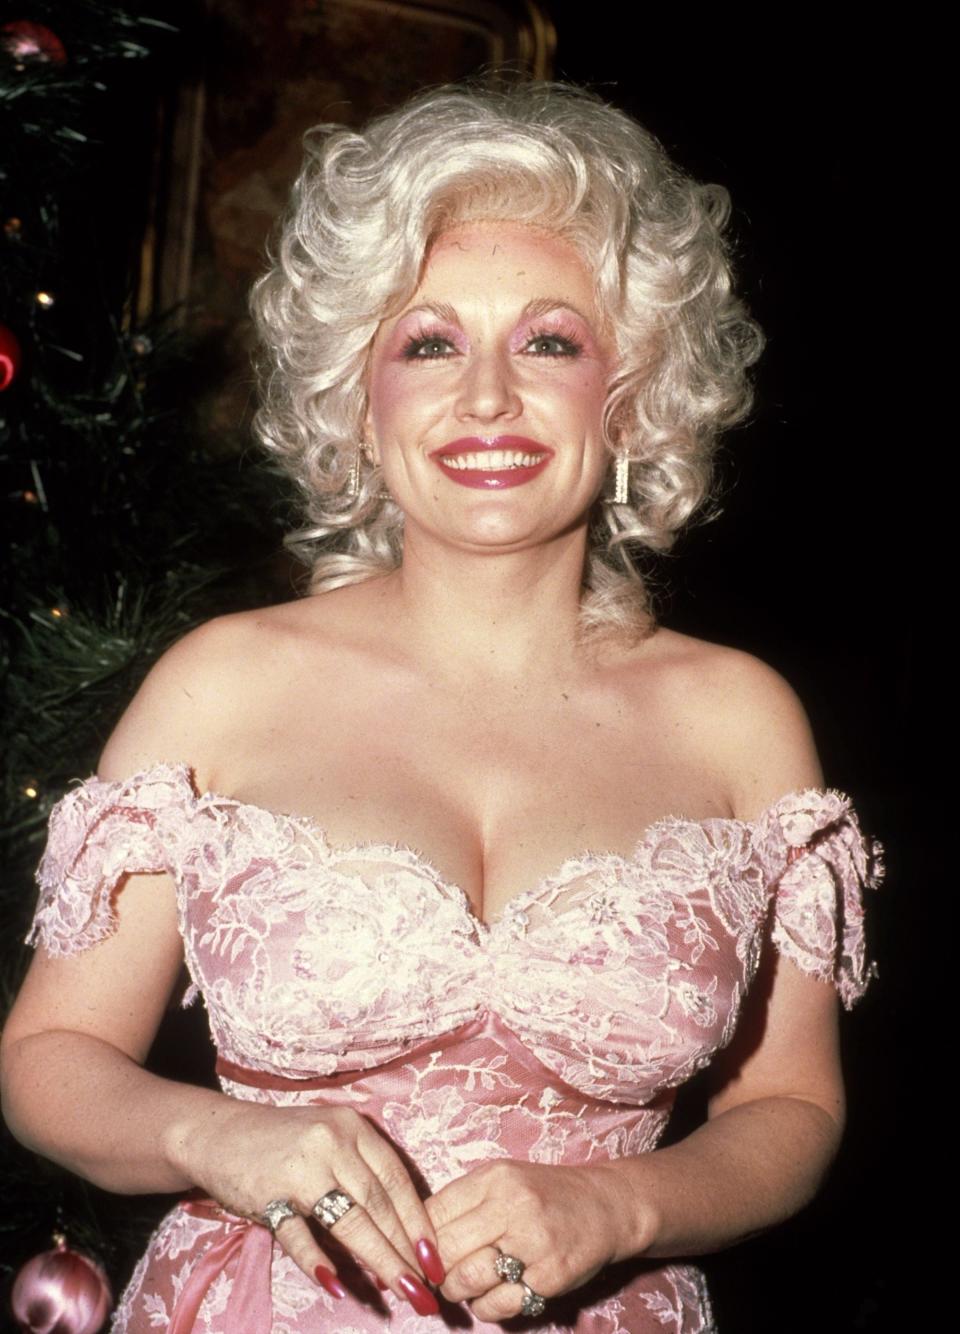 NEW YORK, NY - CIRCA 1981: Dolly Parton circa 1981 in New York City. (Photo by Robin Platzer/Images/Getty Images)